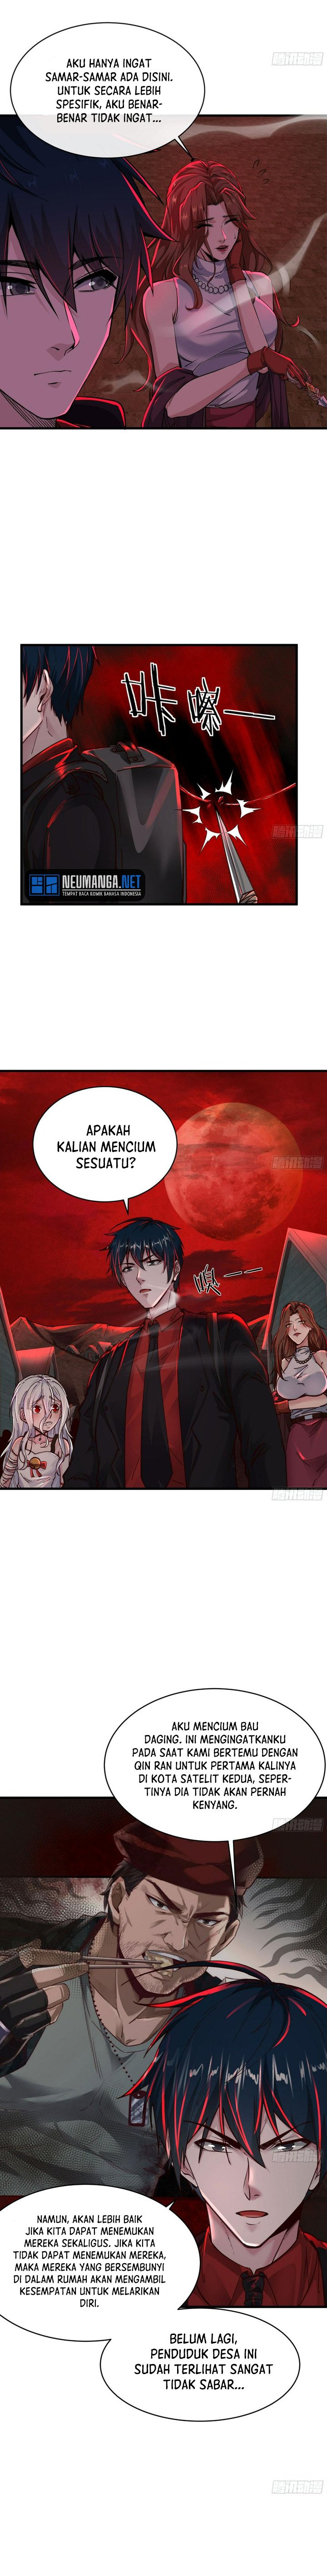 Since The Red Moon Appeared (Hongyue Start) Chapter 66